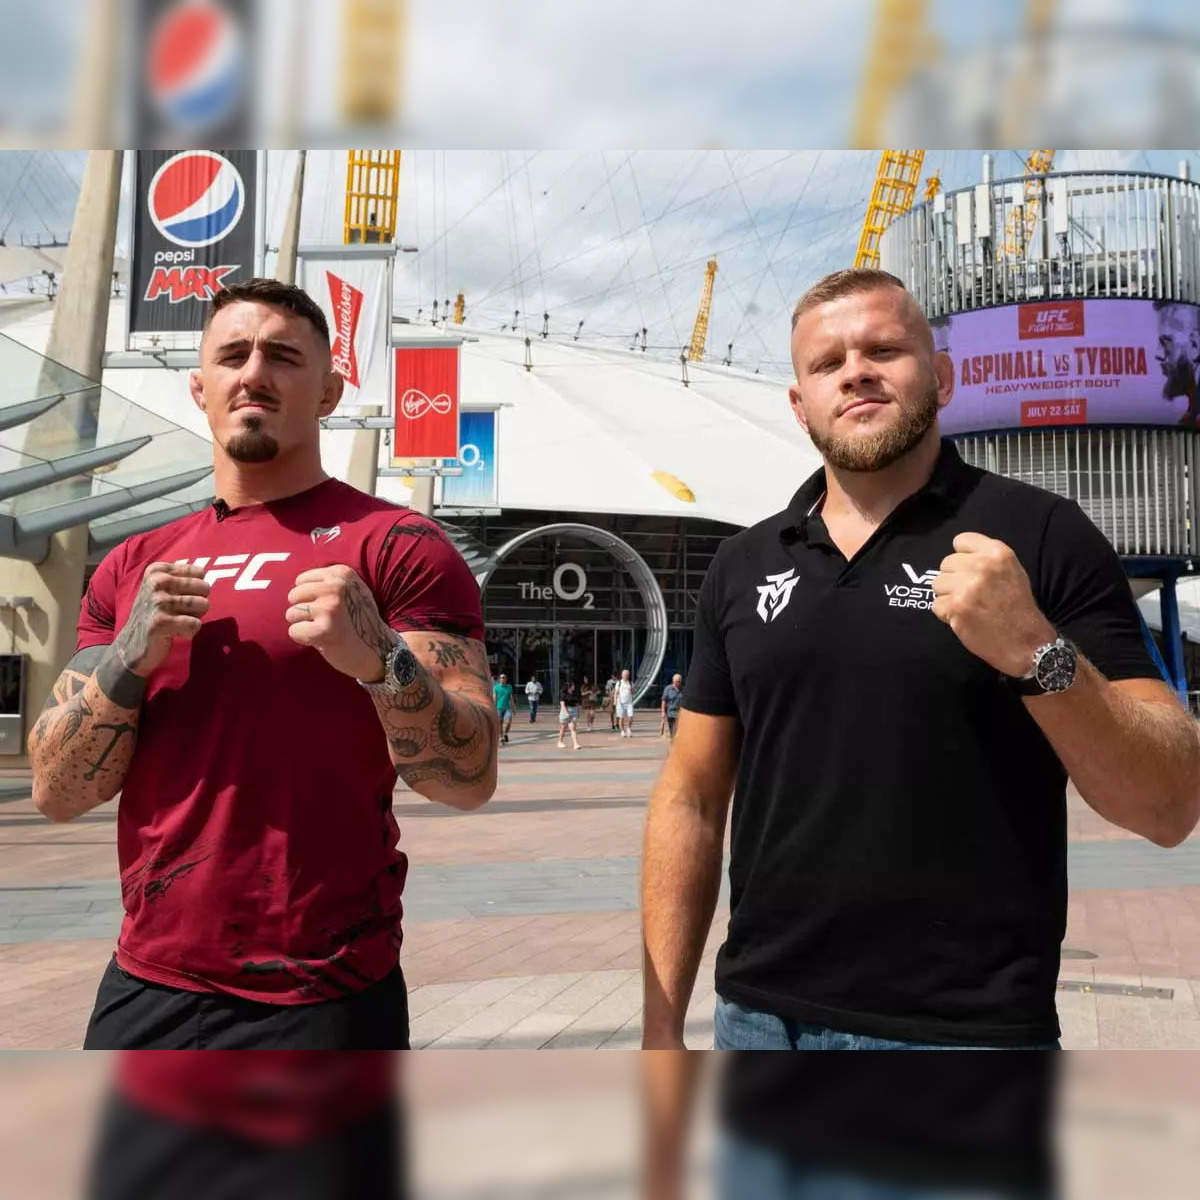 Aspinall vs Tybura: Tom Aspinall vs Marcin Tybura: See start time, full  fight card of UFC London 2023 - The Economic Times